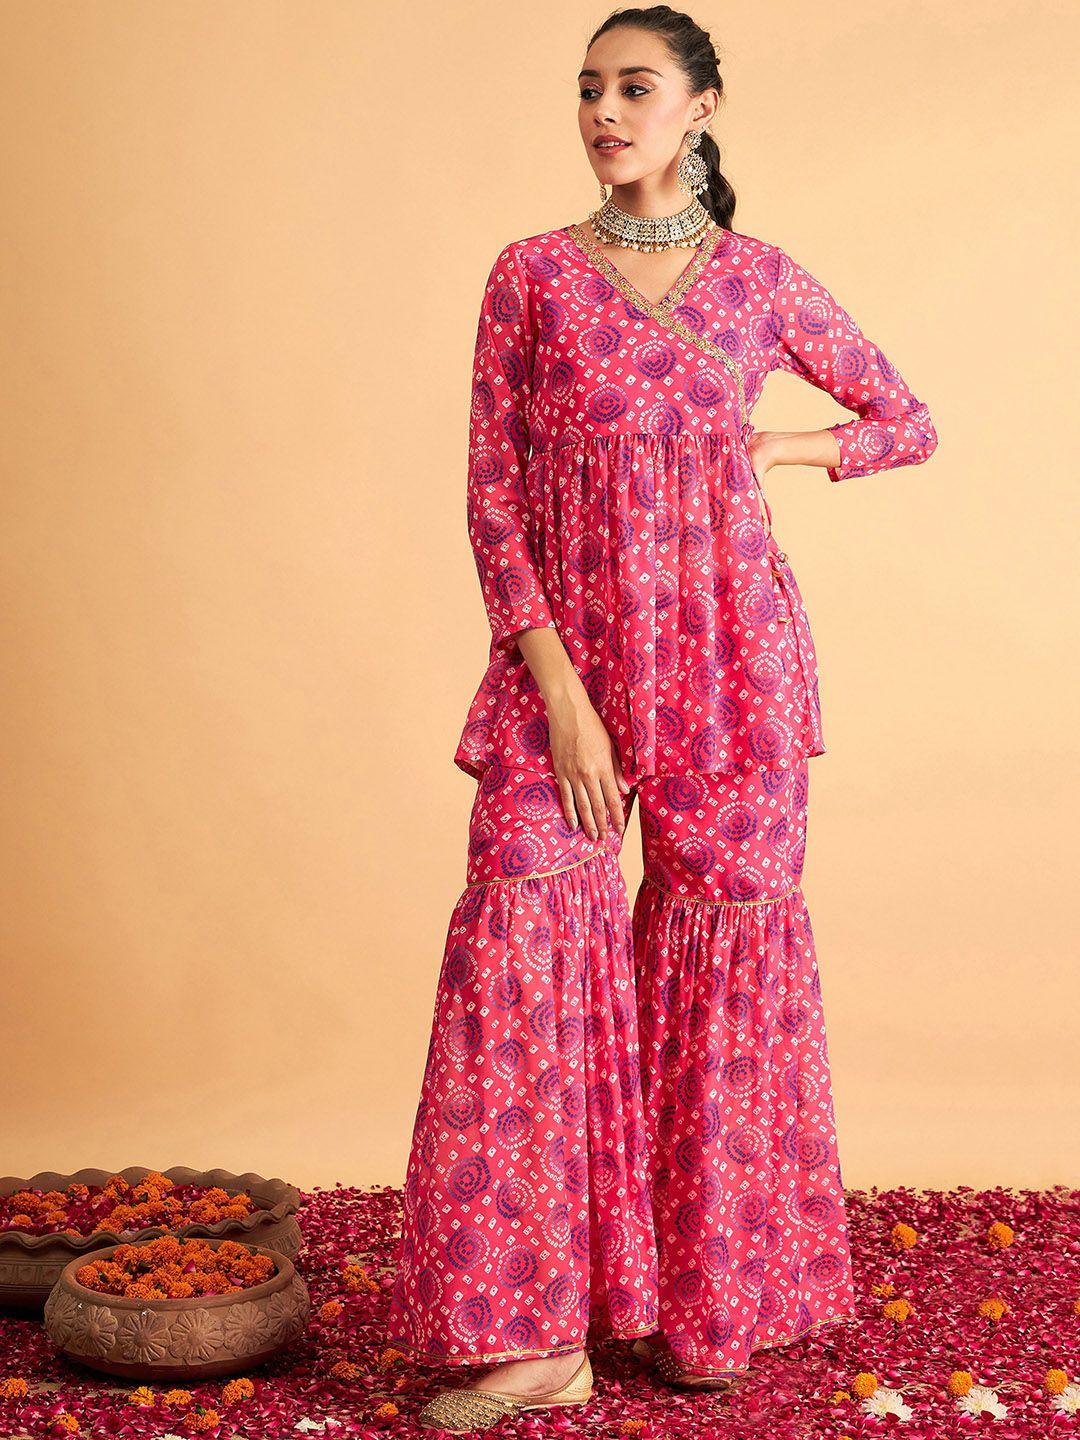 shae by sassafras ethnic motif printed top with sharara co-ords